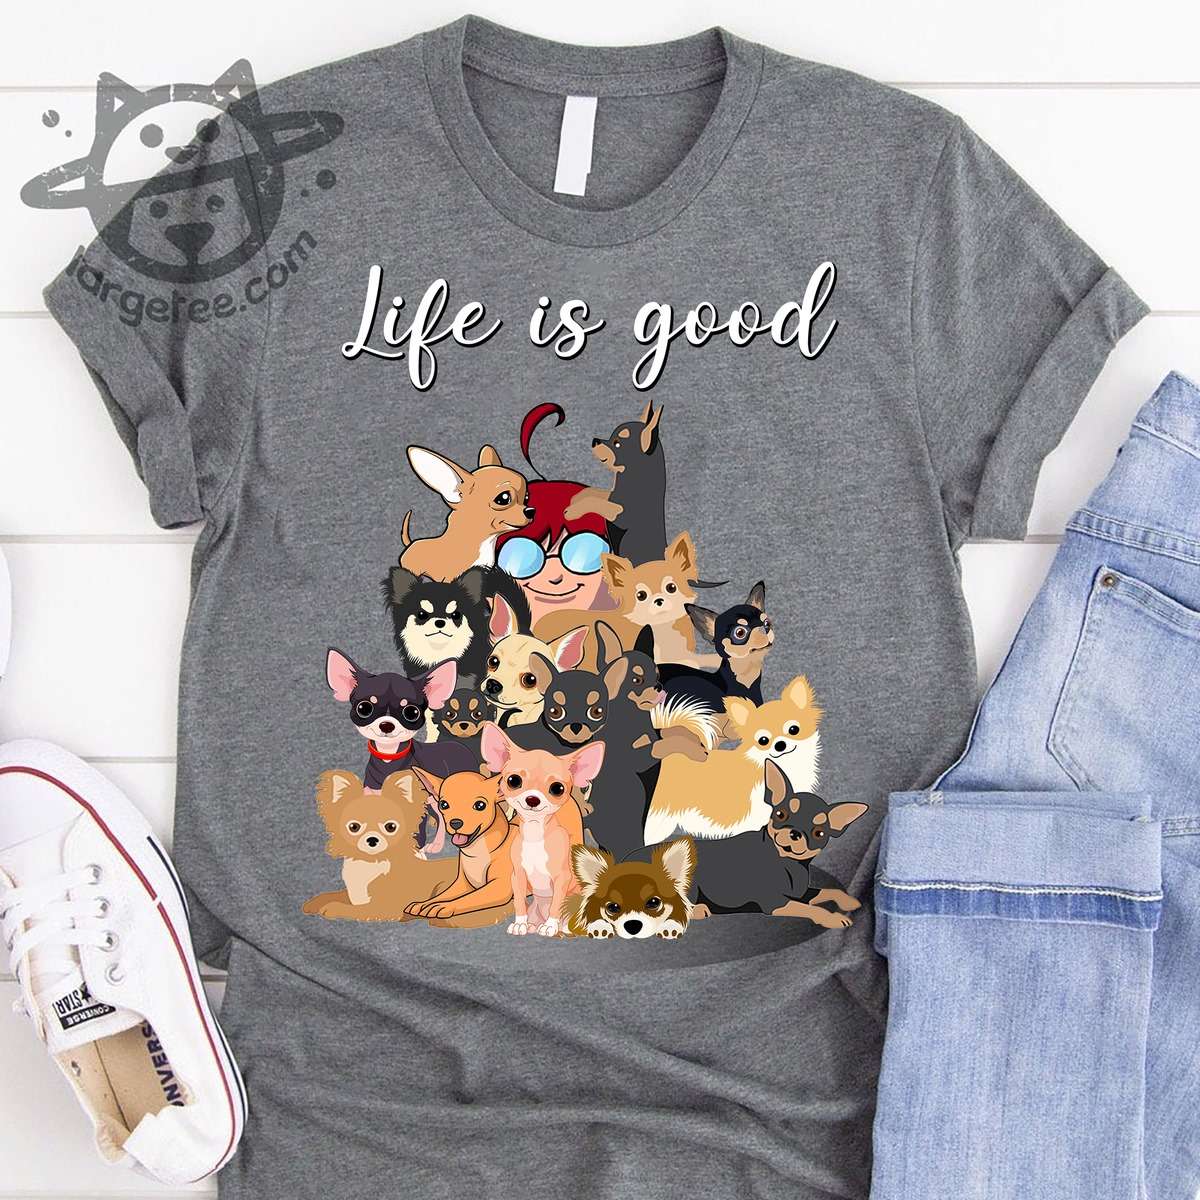 Life is good - Life with Chihuahua, gift for Chihuahua owners